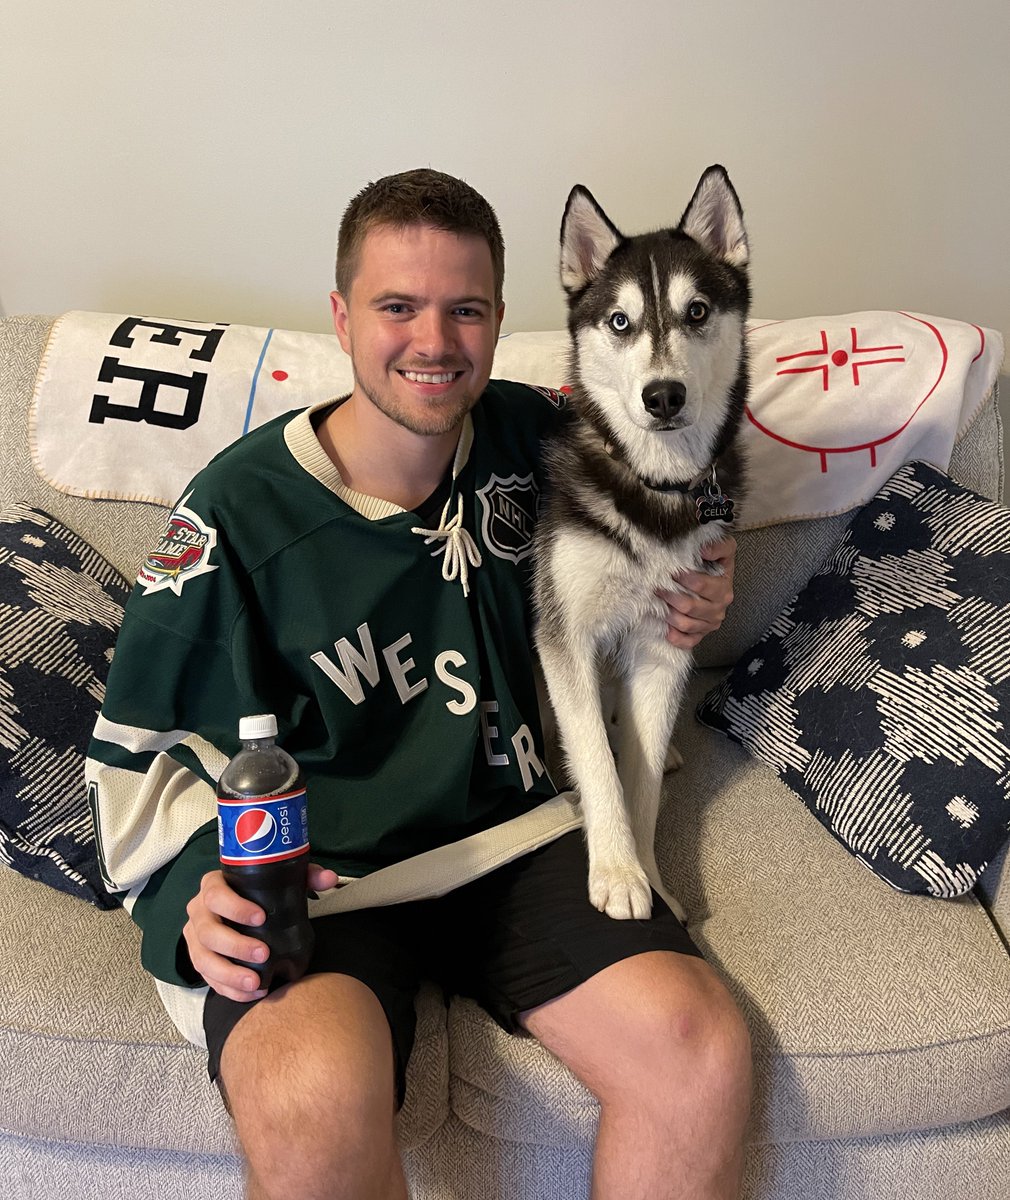 The best way to watch the 2021 Stanley Cup Playoffs...
Retro jersey✔️
Cute pup✔️
 
Share a photo/video of your hockey fandom, tag @littlecaesars and @pepsi, and use #UltimateHockeyHangout #Sweepstakes for your chance to win the hockey hangout of your dreams! #ad